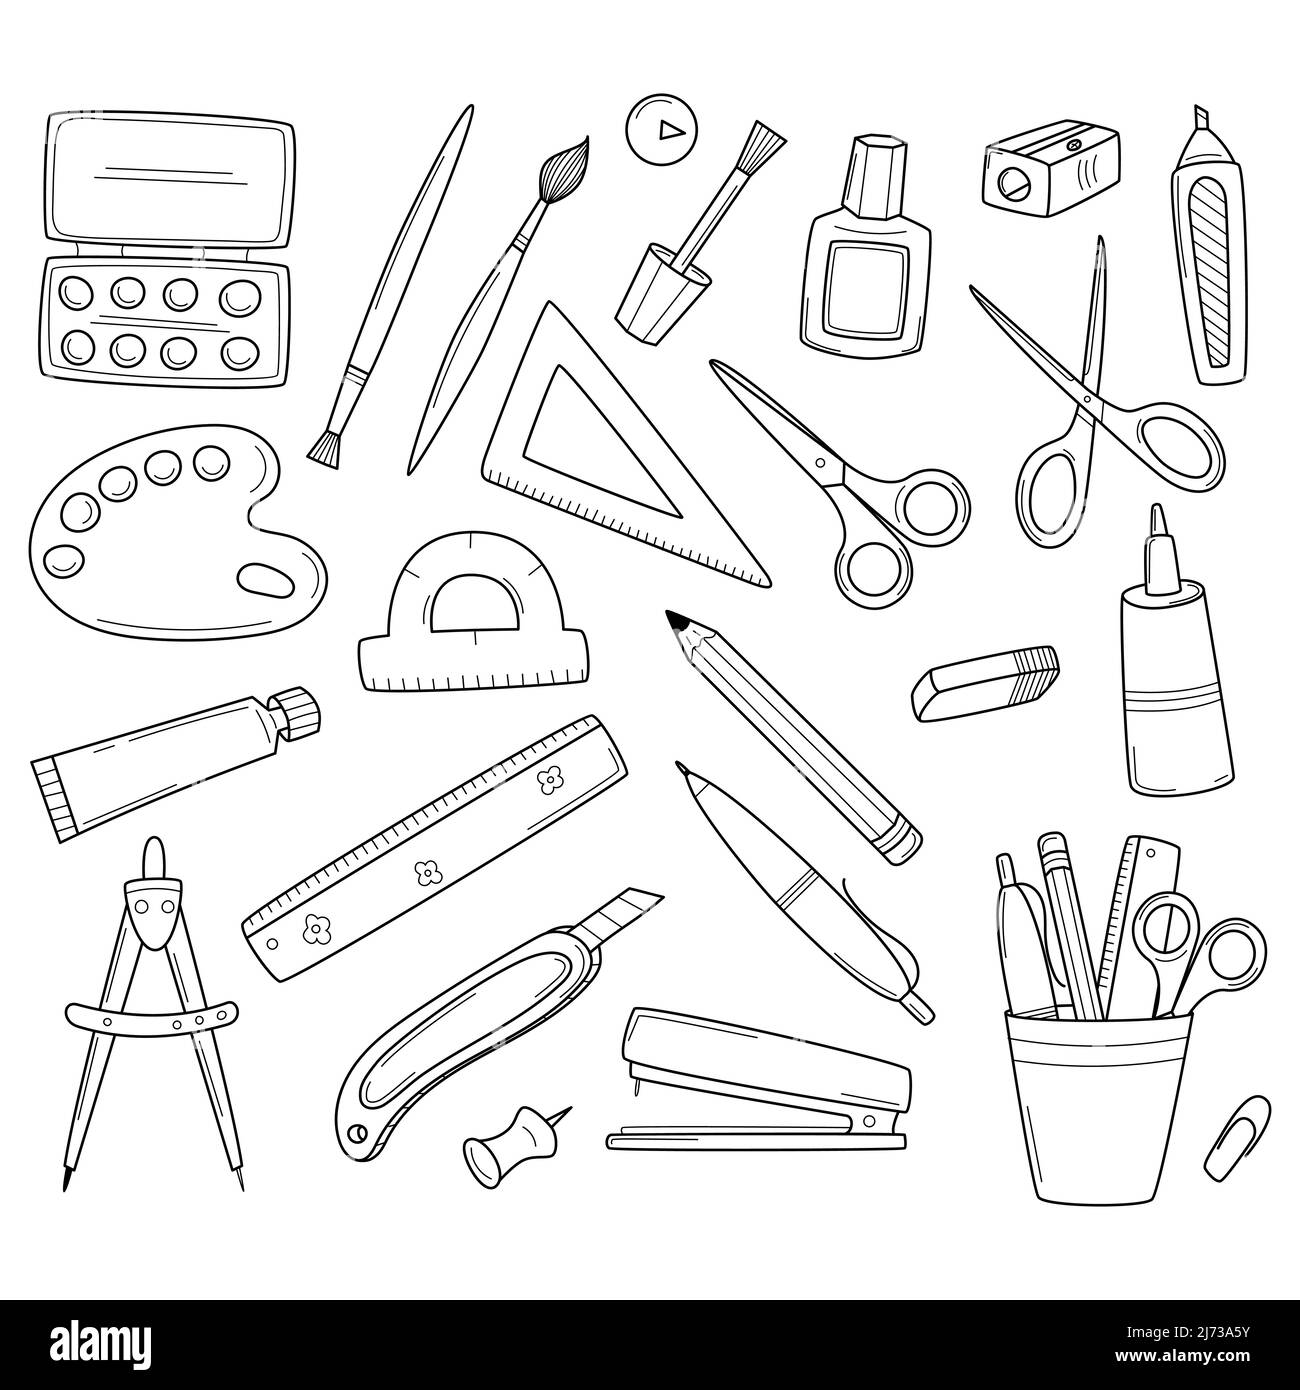 https://c8.alamy.com/comp/2J73A5Y/a-set-of-school-stationery-and-office-supplies-doodle-icon-set-hand-drawn-decorative-elements-black-and-white-outline-vector-illustration-isolated-2J73A5Y.jpg